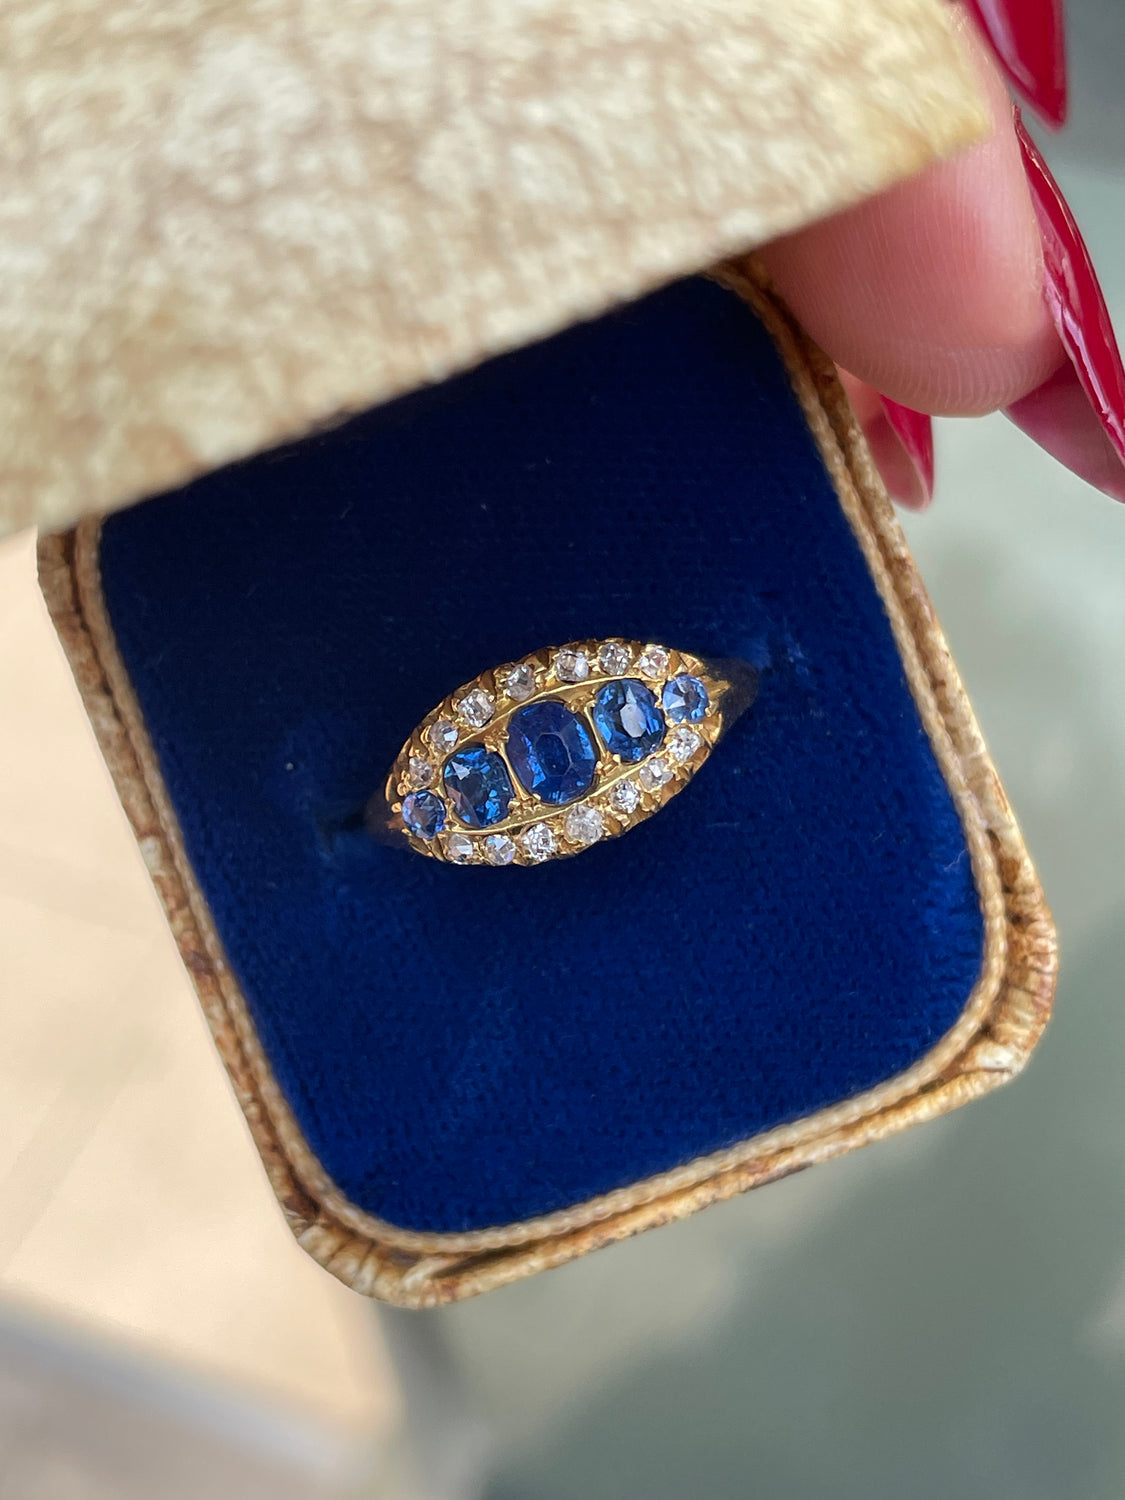 Antique Blue Sapphire and Old Cut Diamond 18 Carat Yellow Gold Ring, Circa 1890s